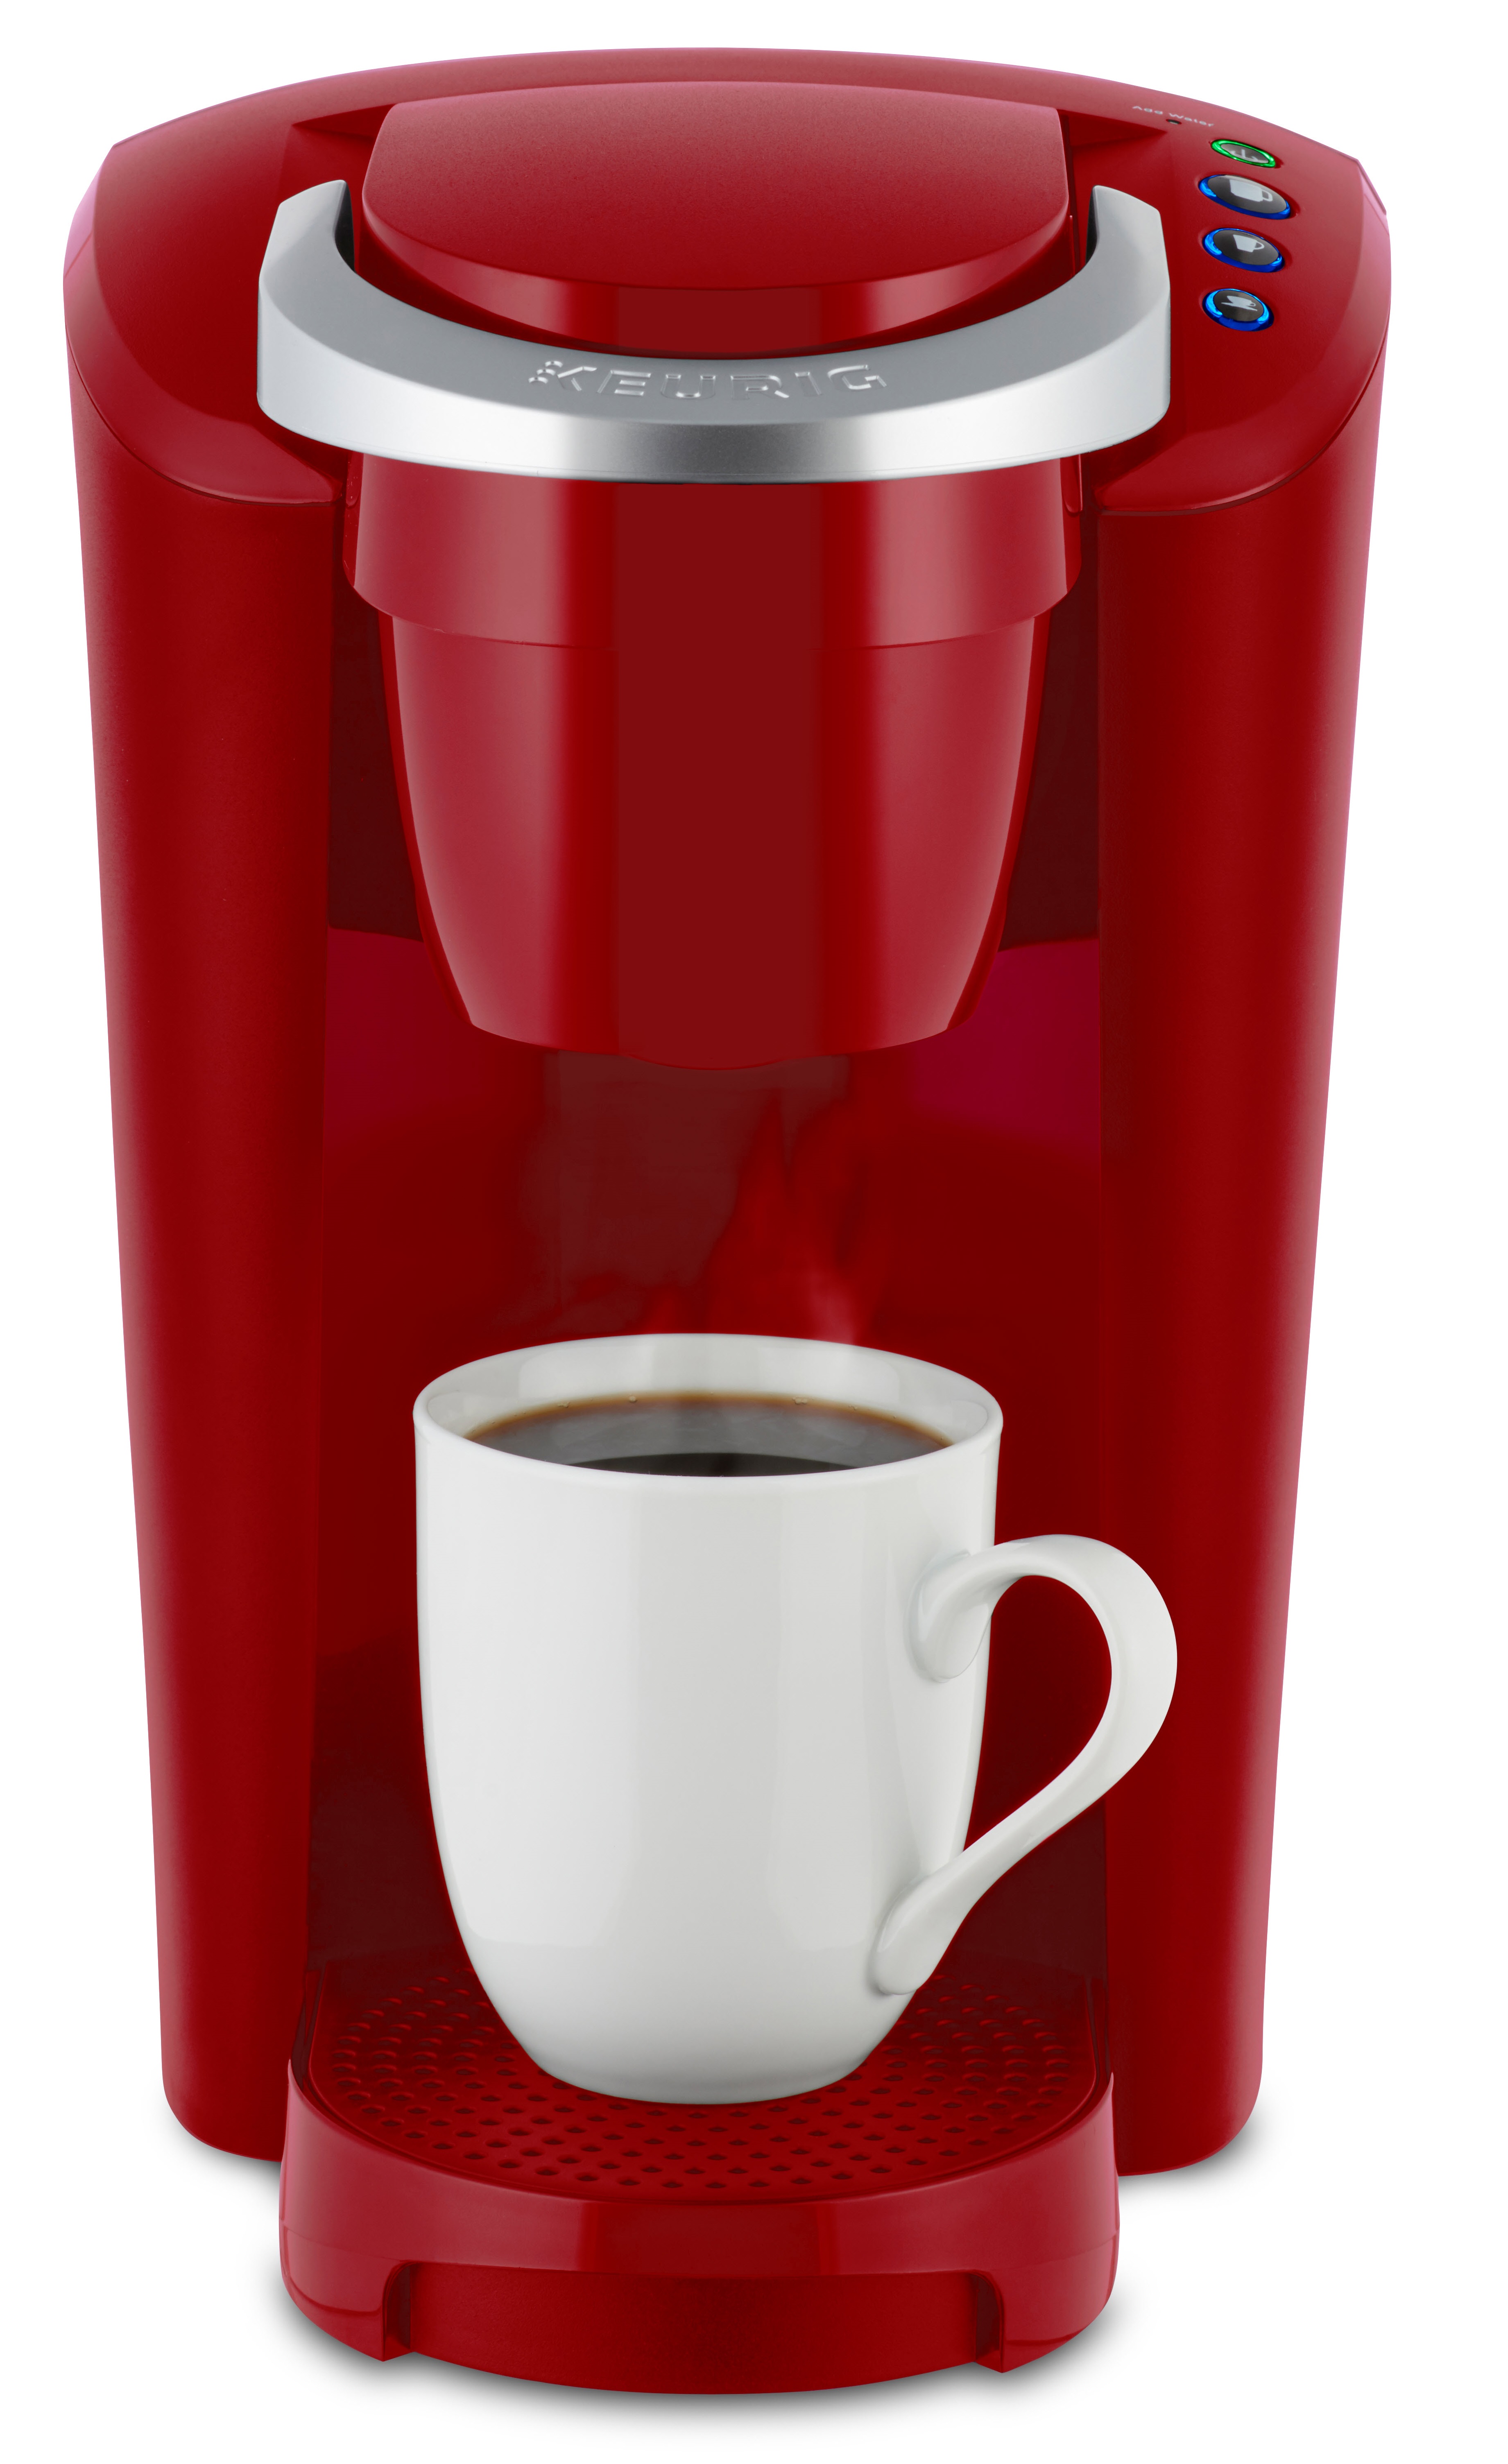 Keurig-K-Compact-Single-Serve-K-Cup-Pod-Coffee-Maker-Imperial-Red-1